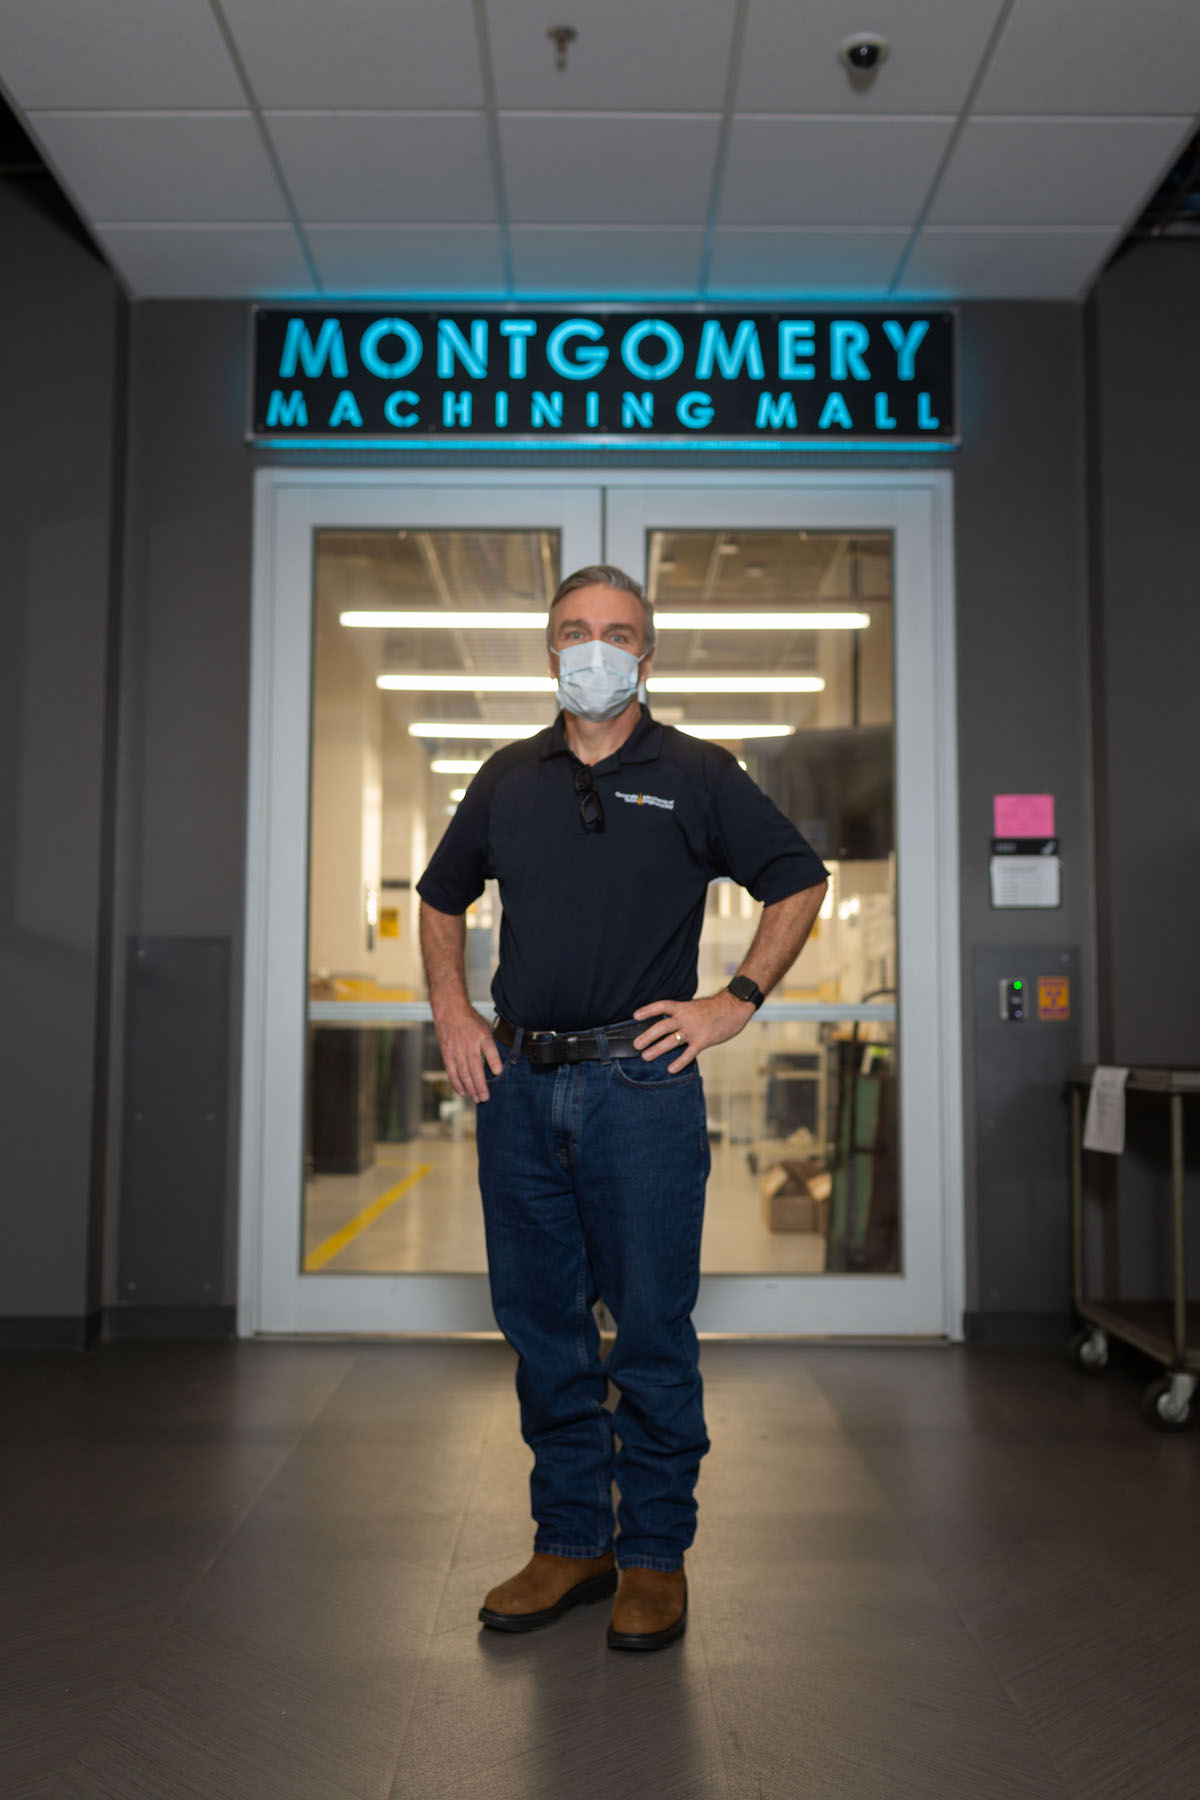 Steven Sheffield at the Woodruff School of Mechanical Engineering's Montgomery Machining Mall. (Photo by Allison Carter.)